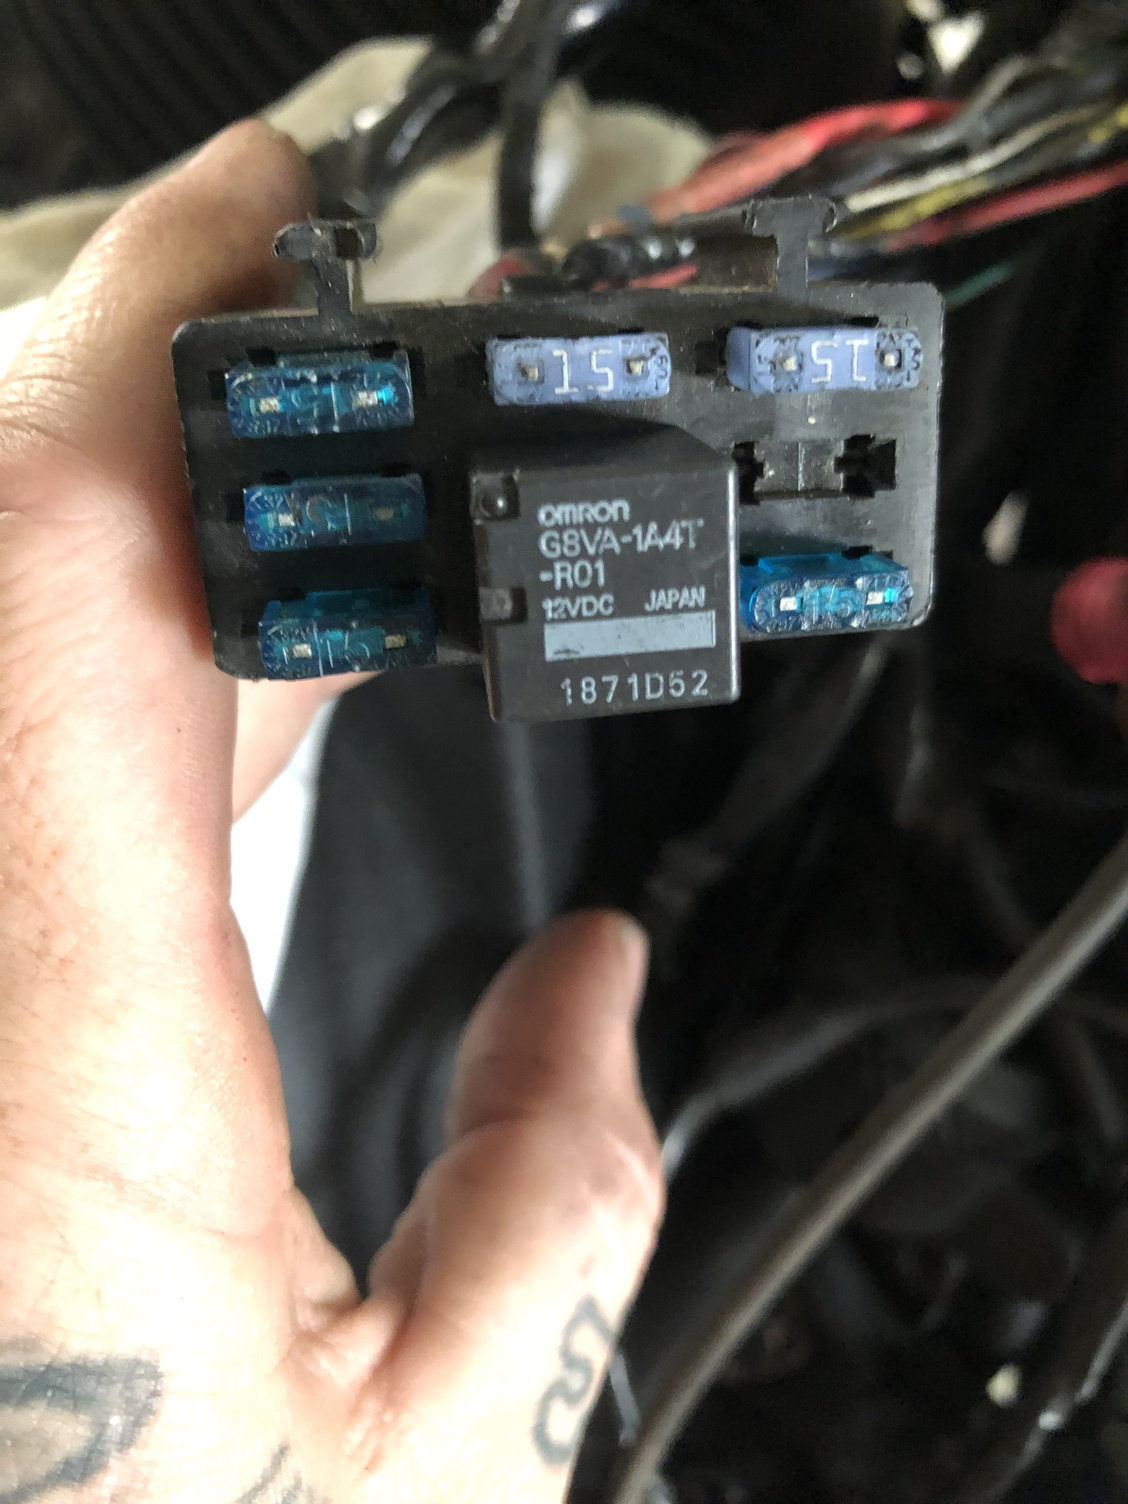 System relay wiring issues on 2013 forty eight - Harley Davidson Forums